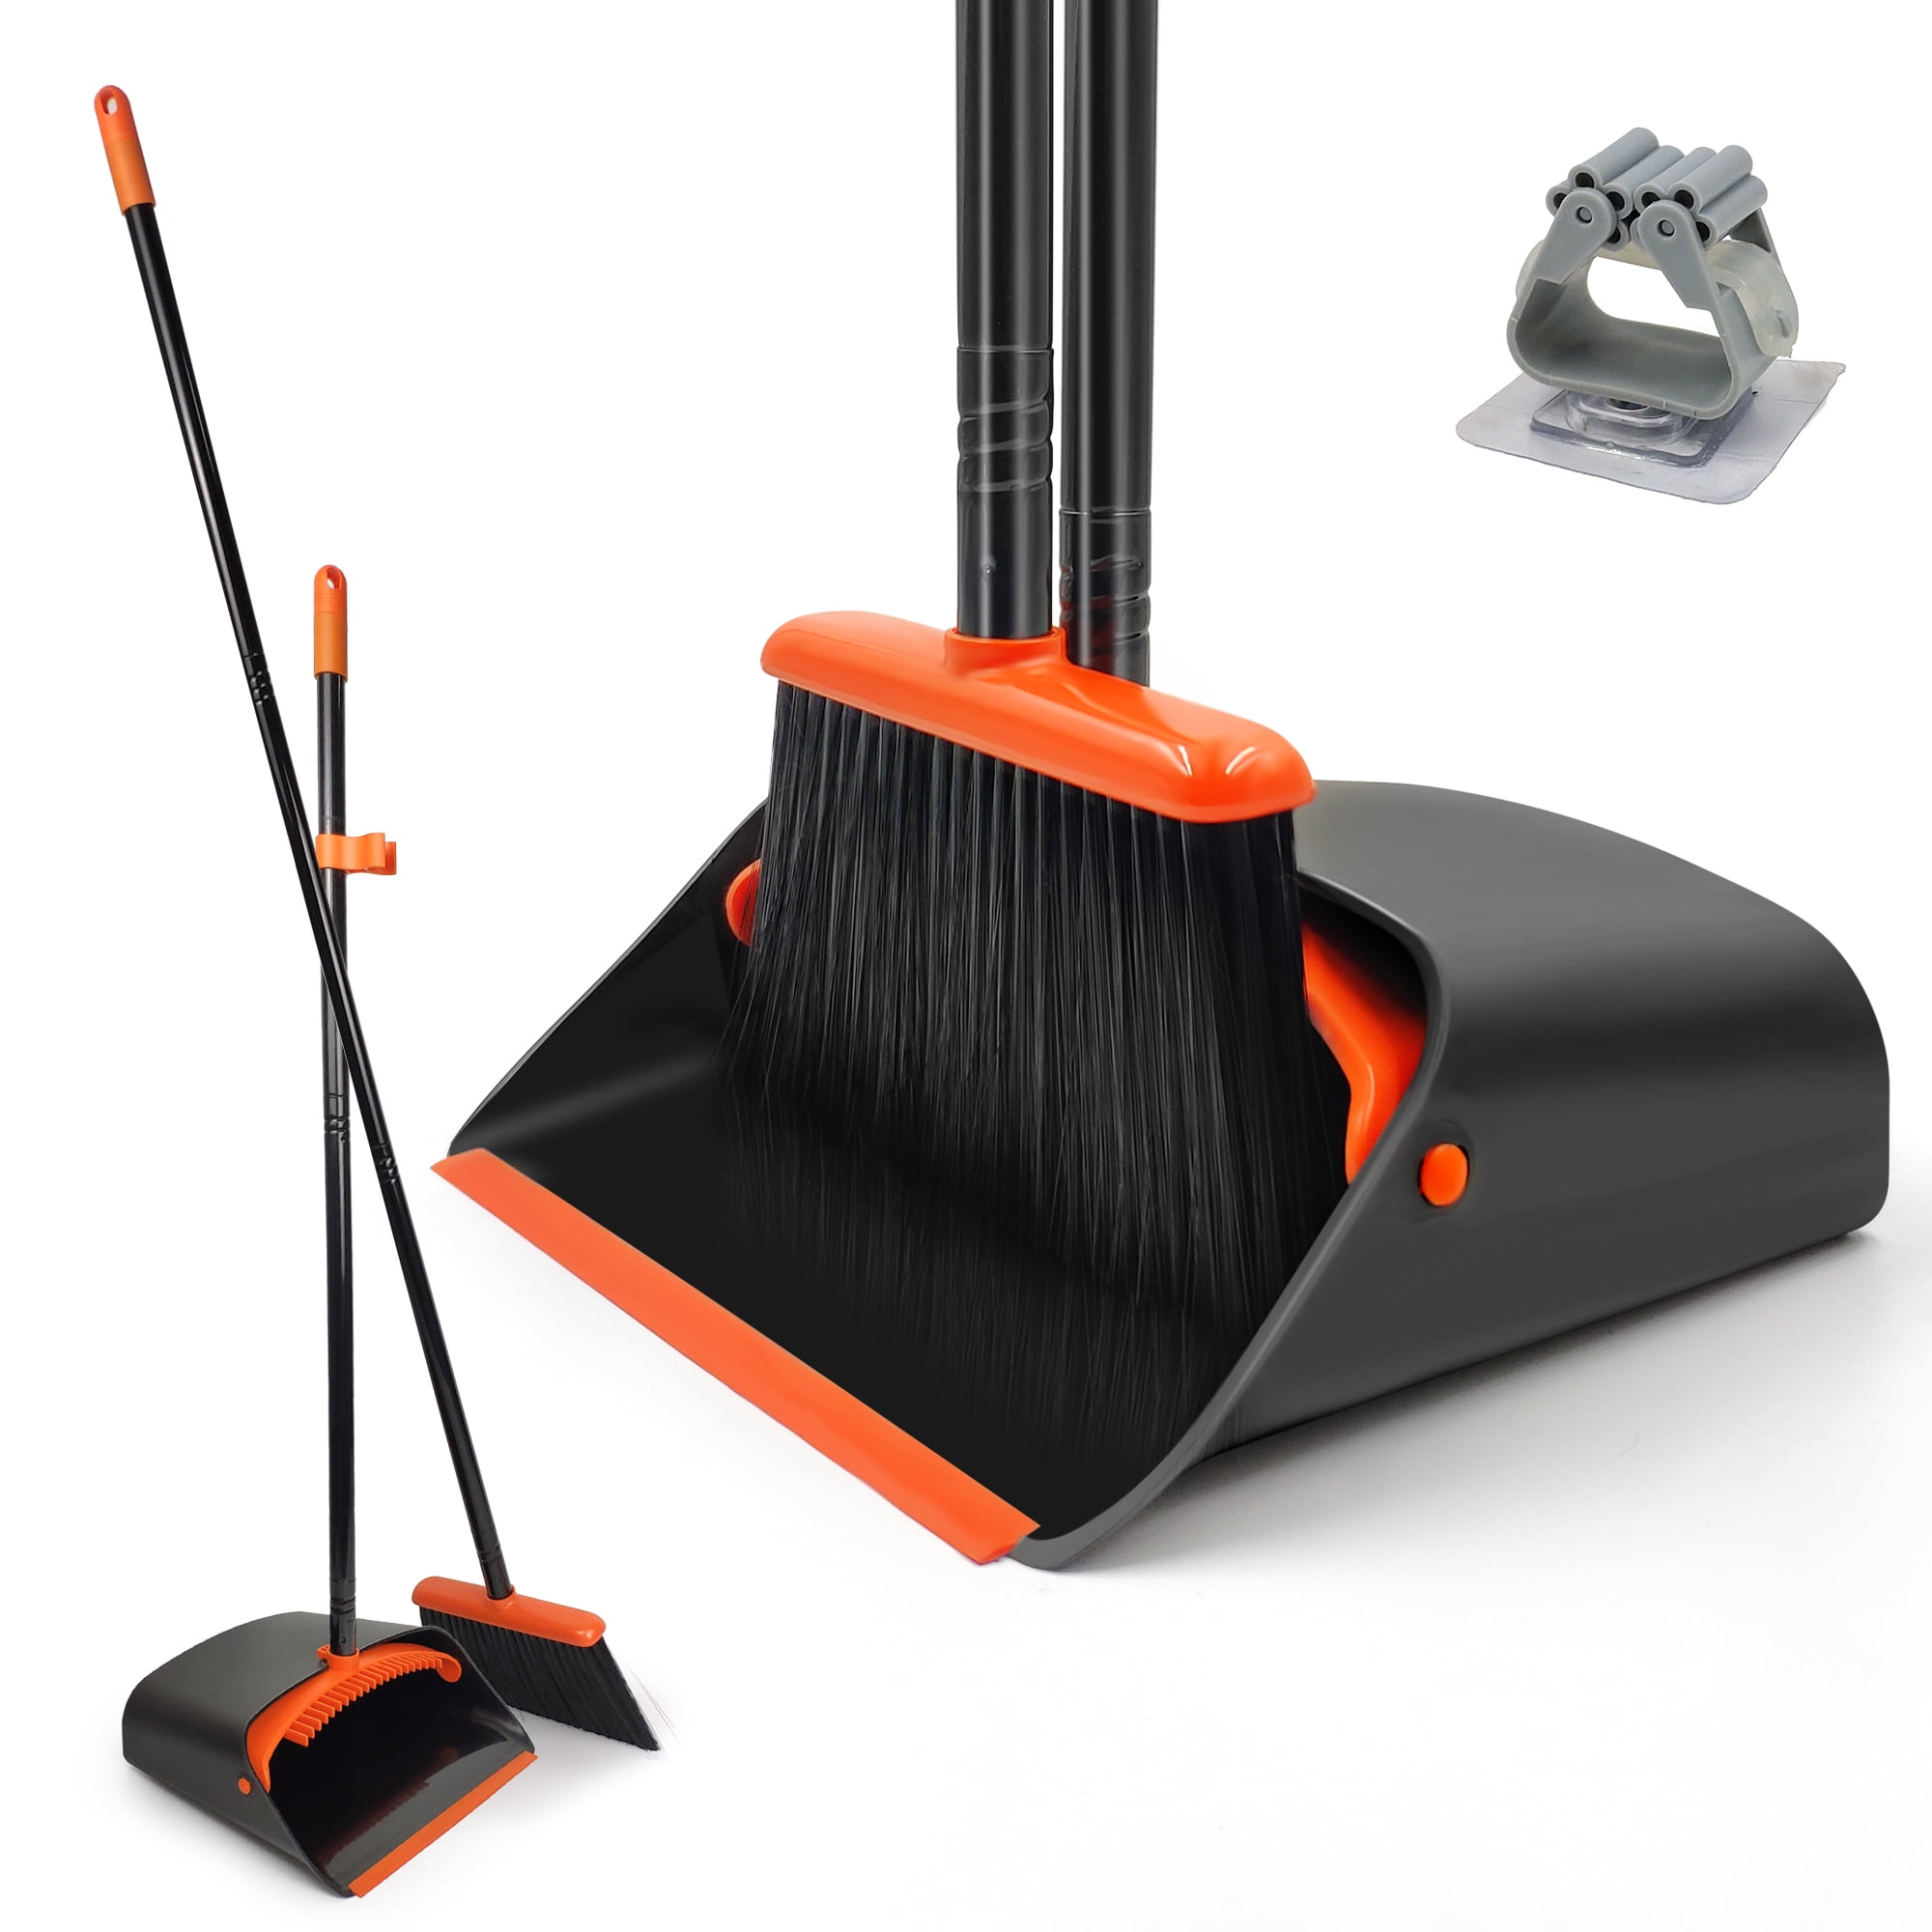 Broom for Indoor Outdoor Garage Kitchen Room Office Lobby Use Broom and Dustpan Set Heavy Duty Dust Pan with 55 Long Handle Upright Dustpan Broom Set Gray and Orange Large Broom and Dustpan 